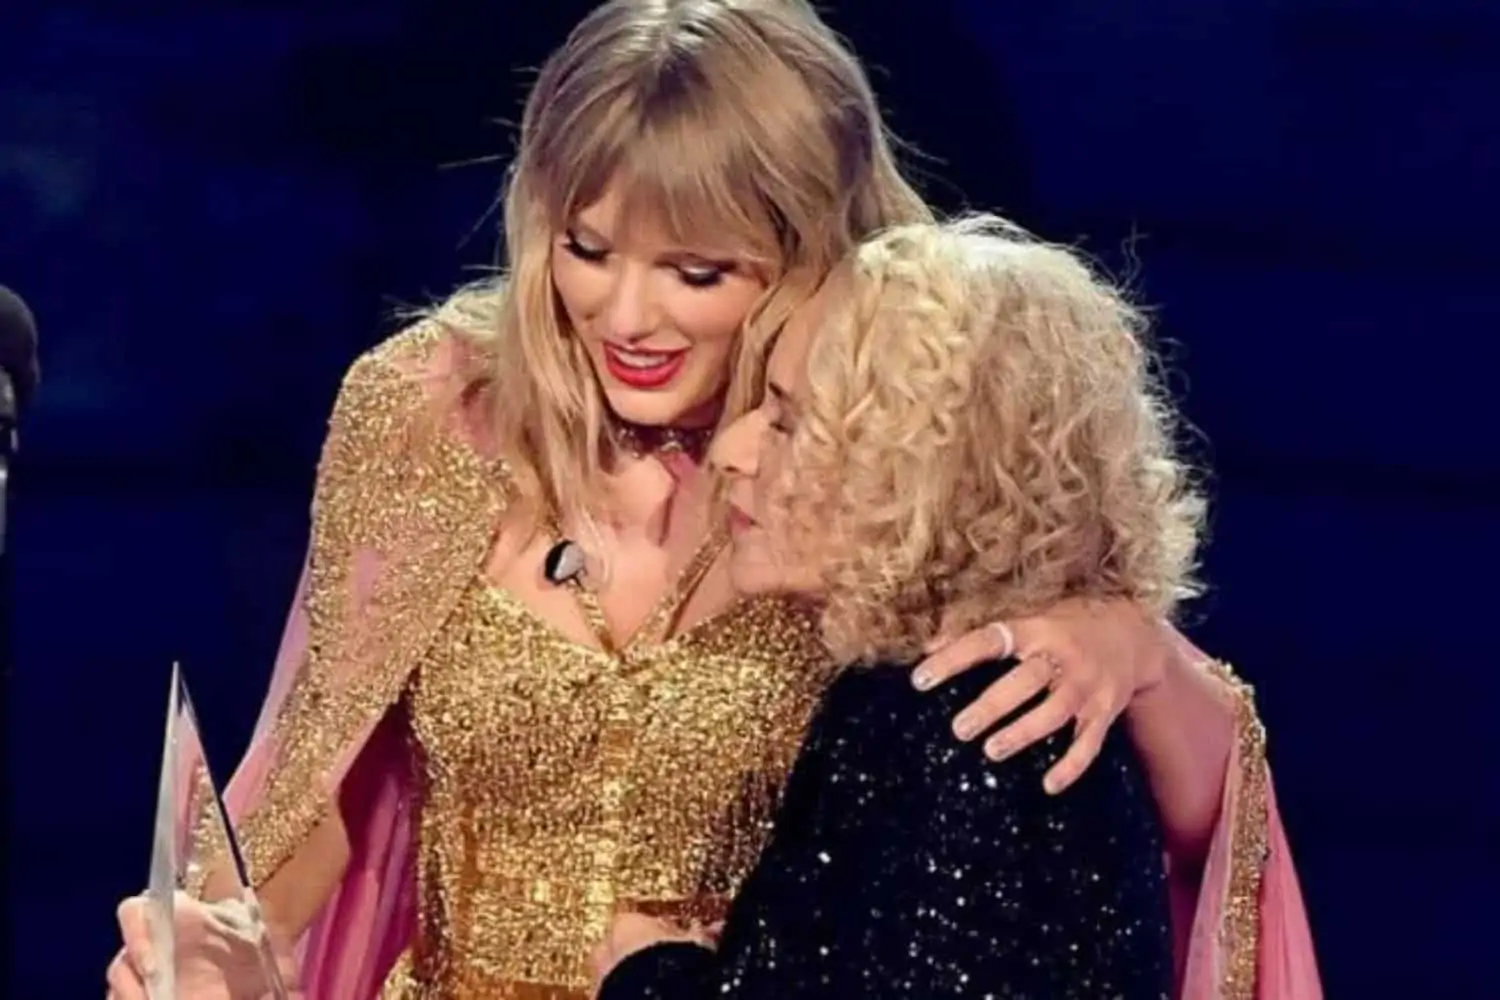 Taylor Swift inducts Carole King into the Rock & Roll Hall of Fame